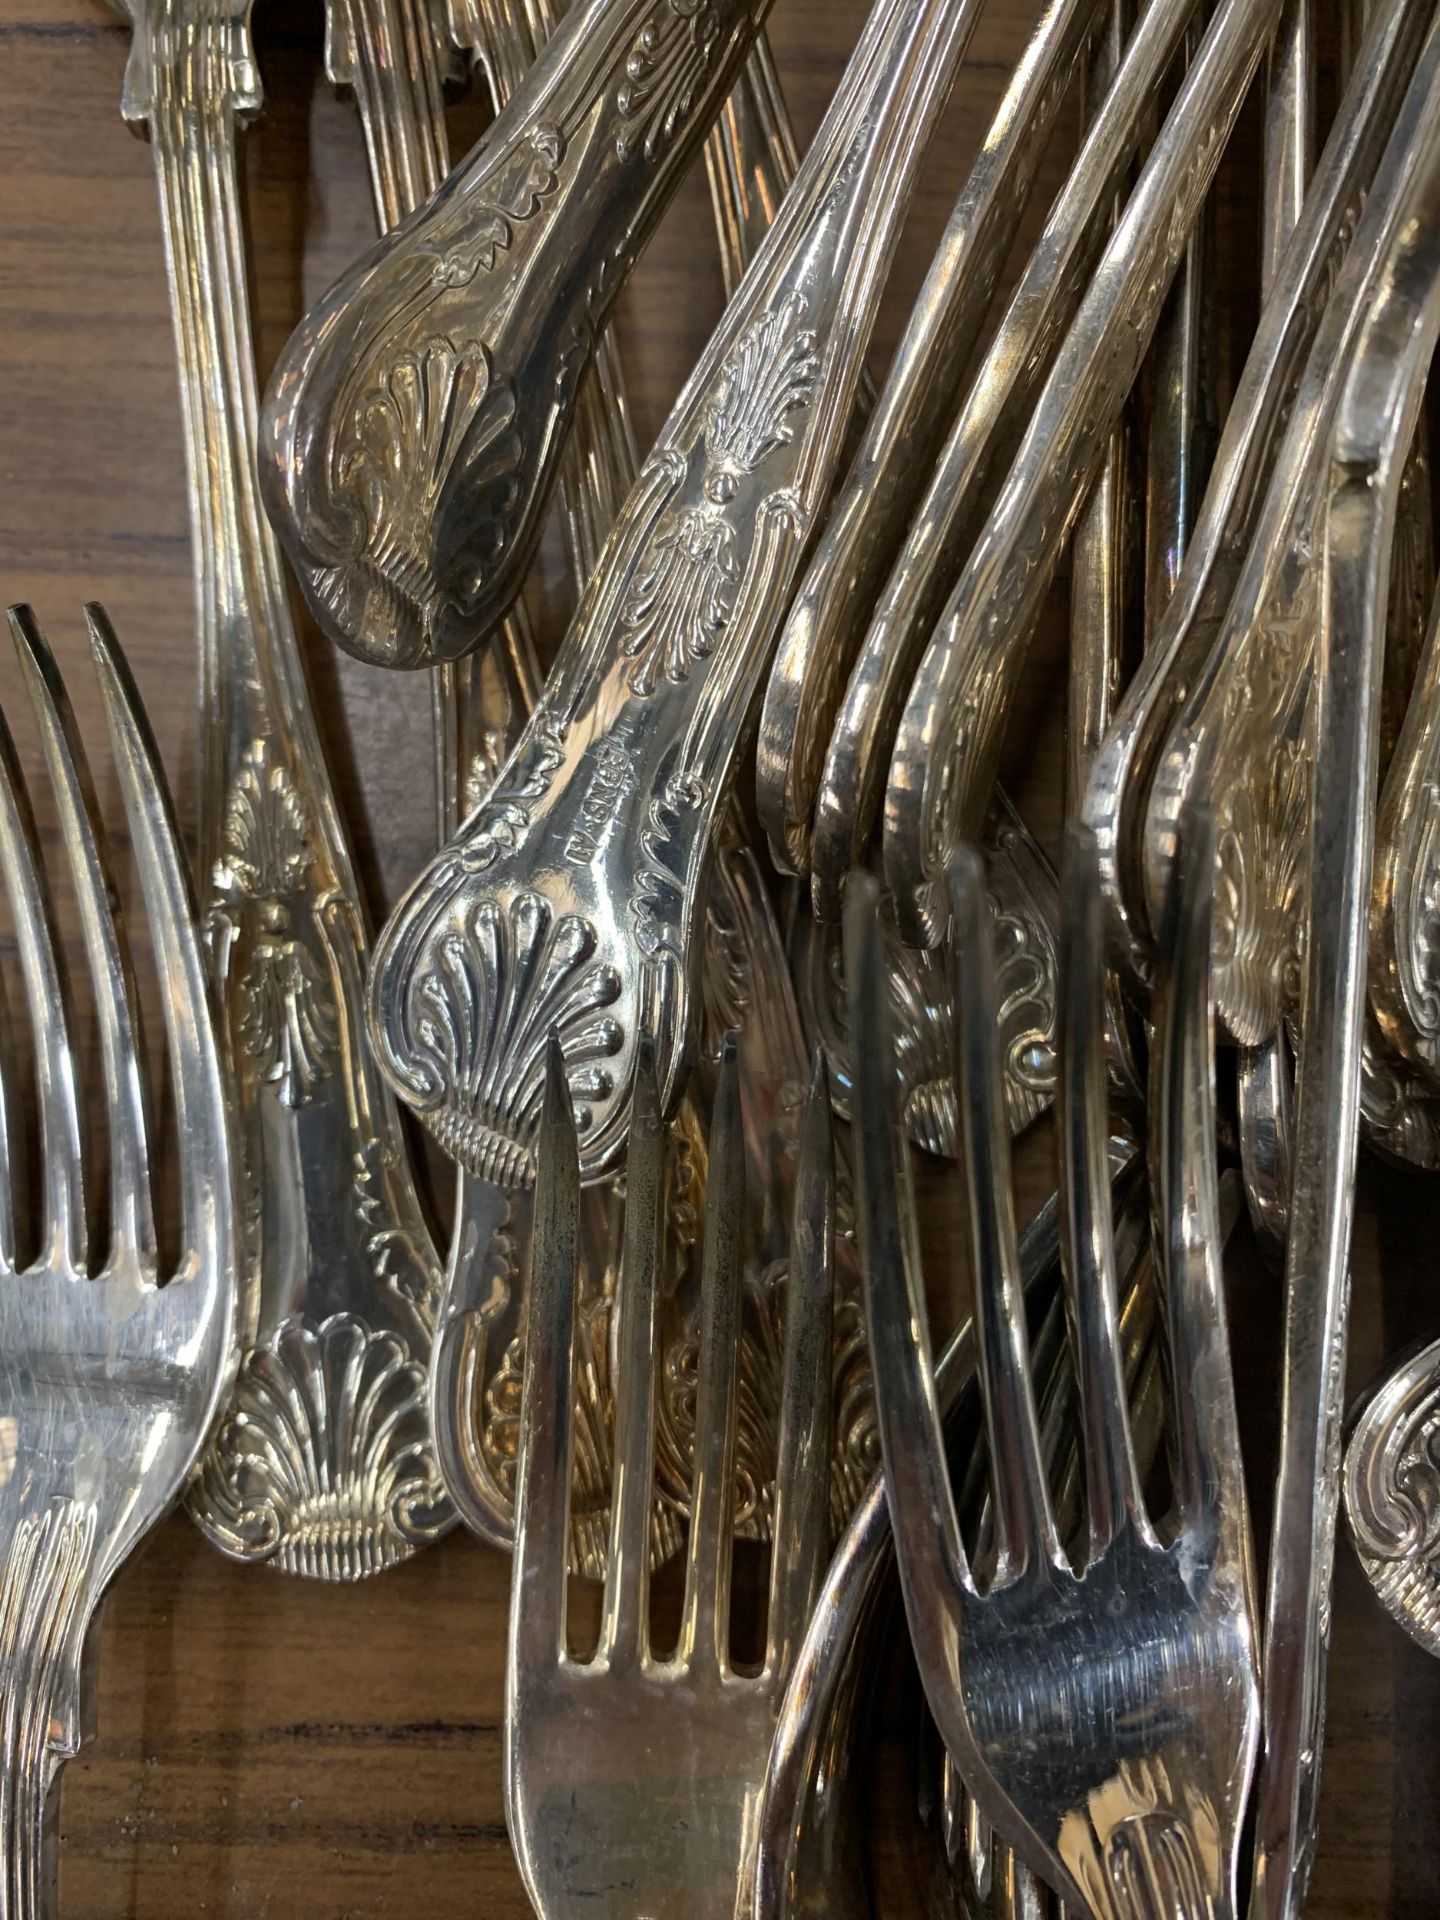 A QUANTITY OF VINTAGE FLATWARE, KNIVES, FORKS, SPOONS, ETC - Image 2 of 3